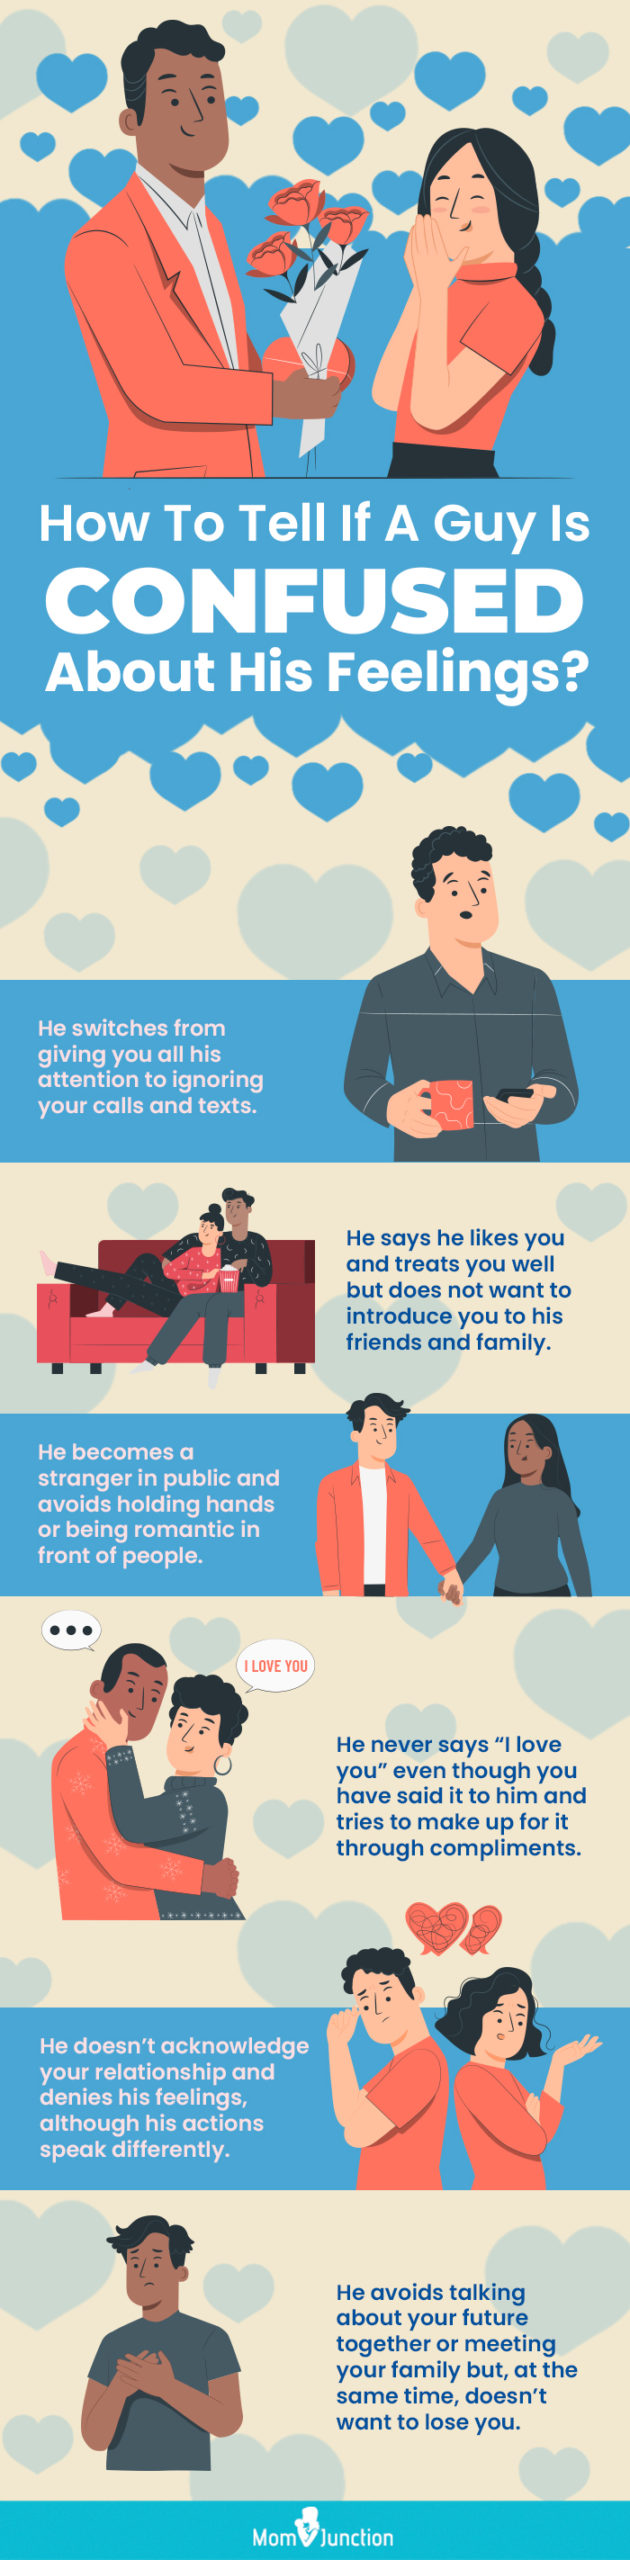 how to tell if a guy is confused about his feelings (infographic)